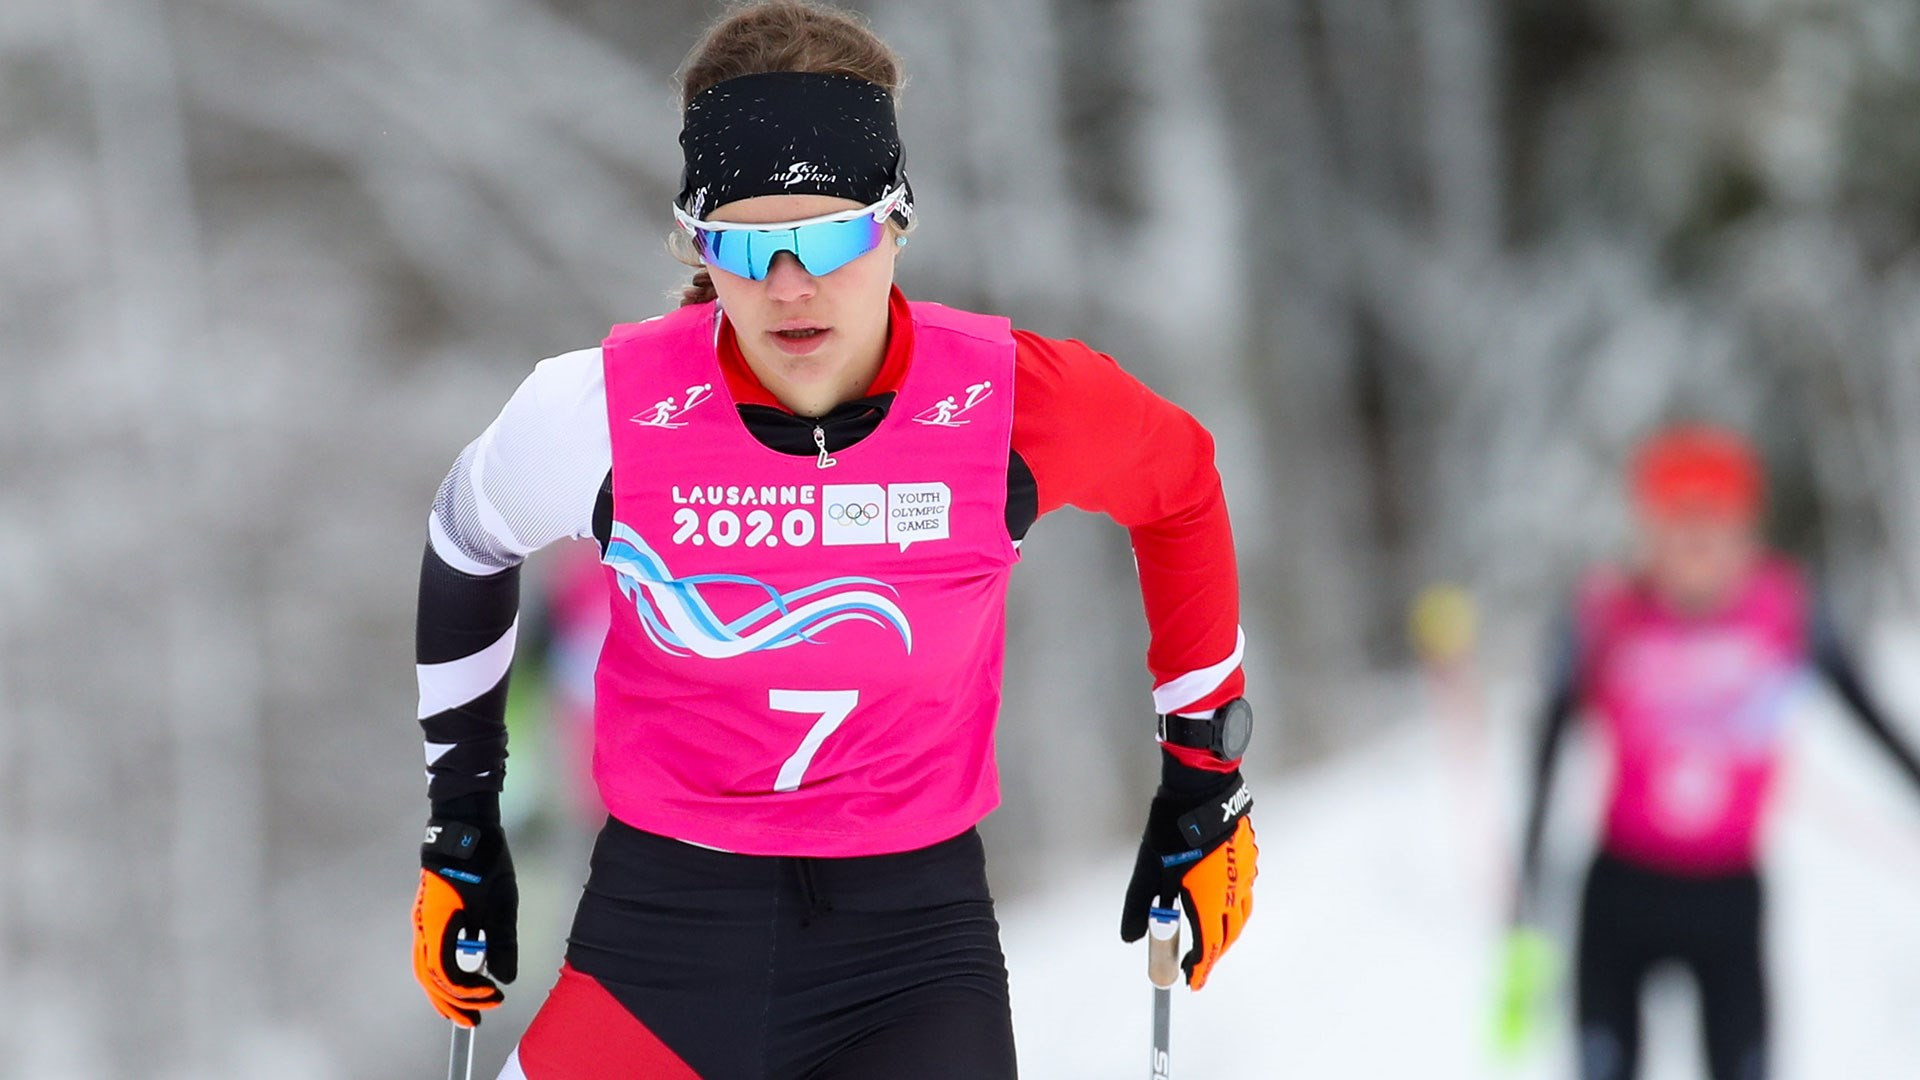 Johanna Bassani won a team silver medal at the 2020 Winter Youth Olympics in Lausanne ©ÖSV